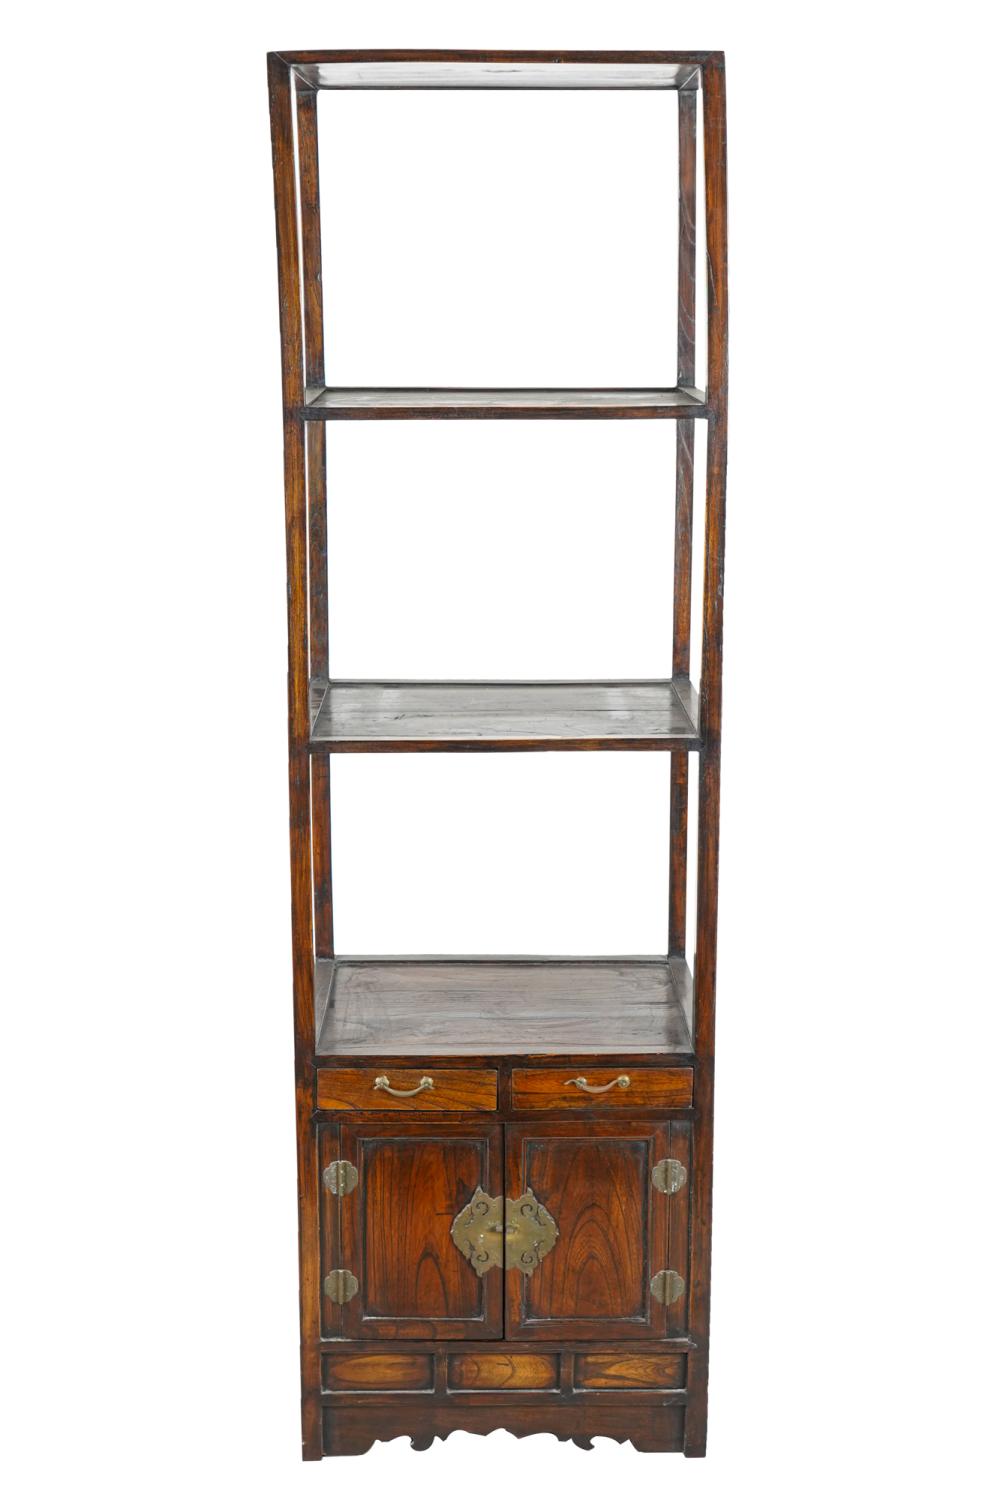 ASIAN STYLE ETAGERE CABINETwith 3379b8